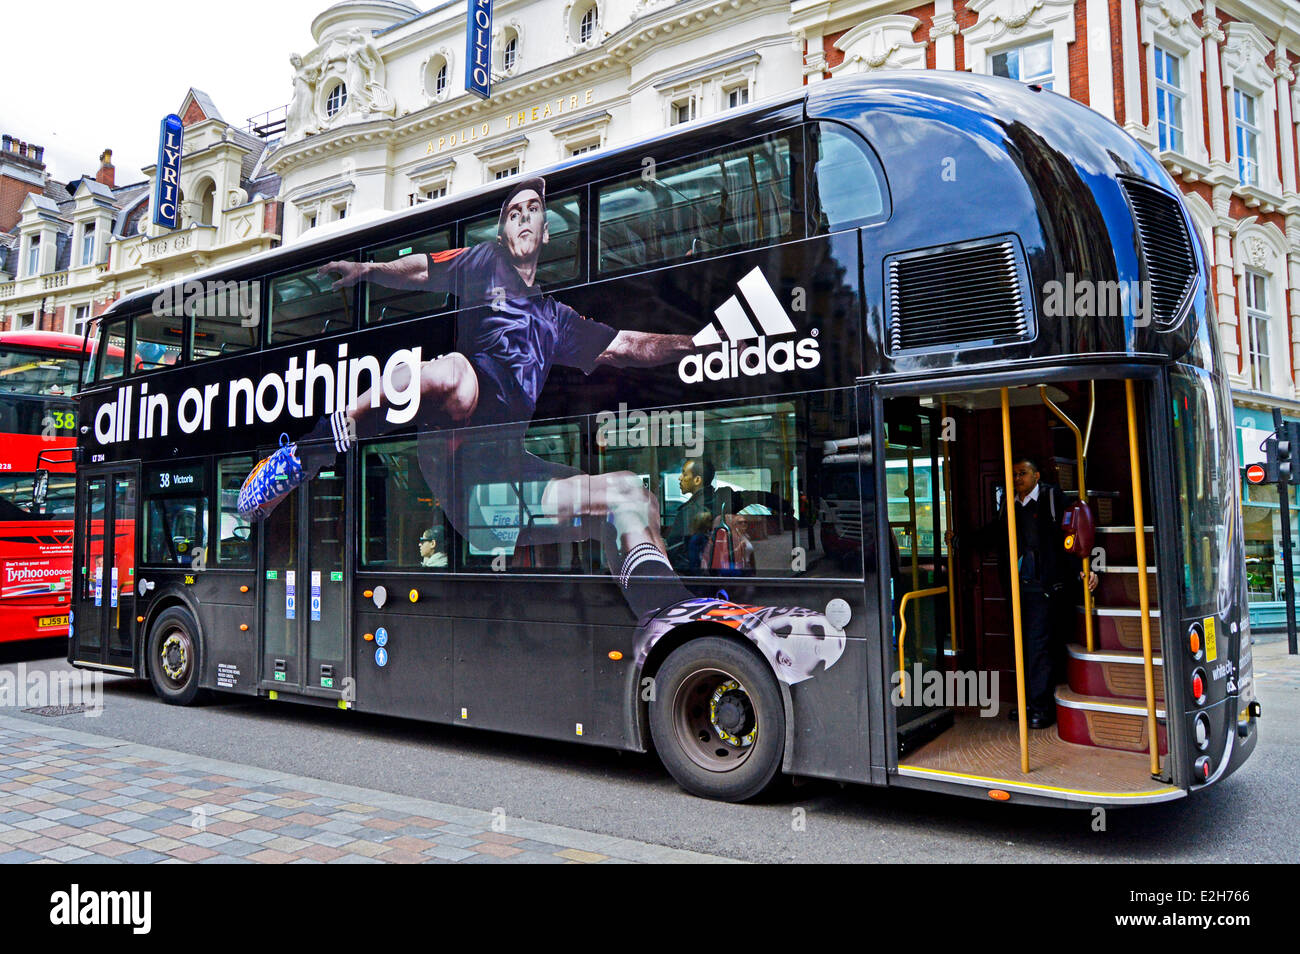 Advertisement On Bus High Resolution Stock Photography and Images - Alamy